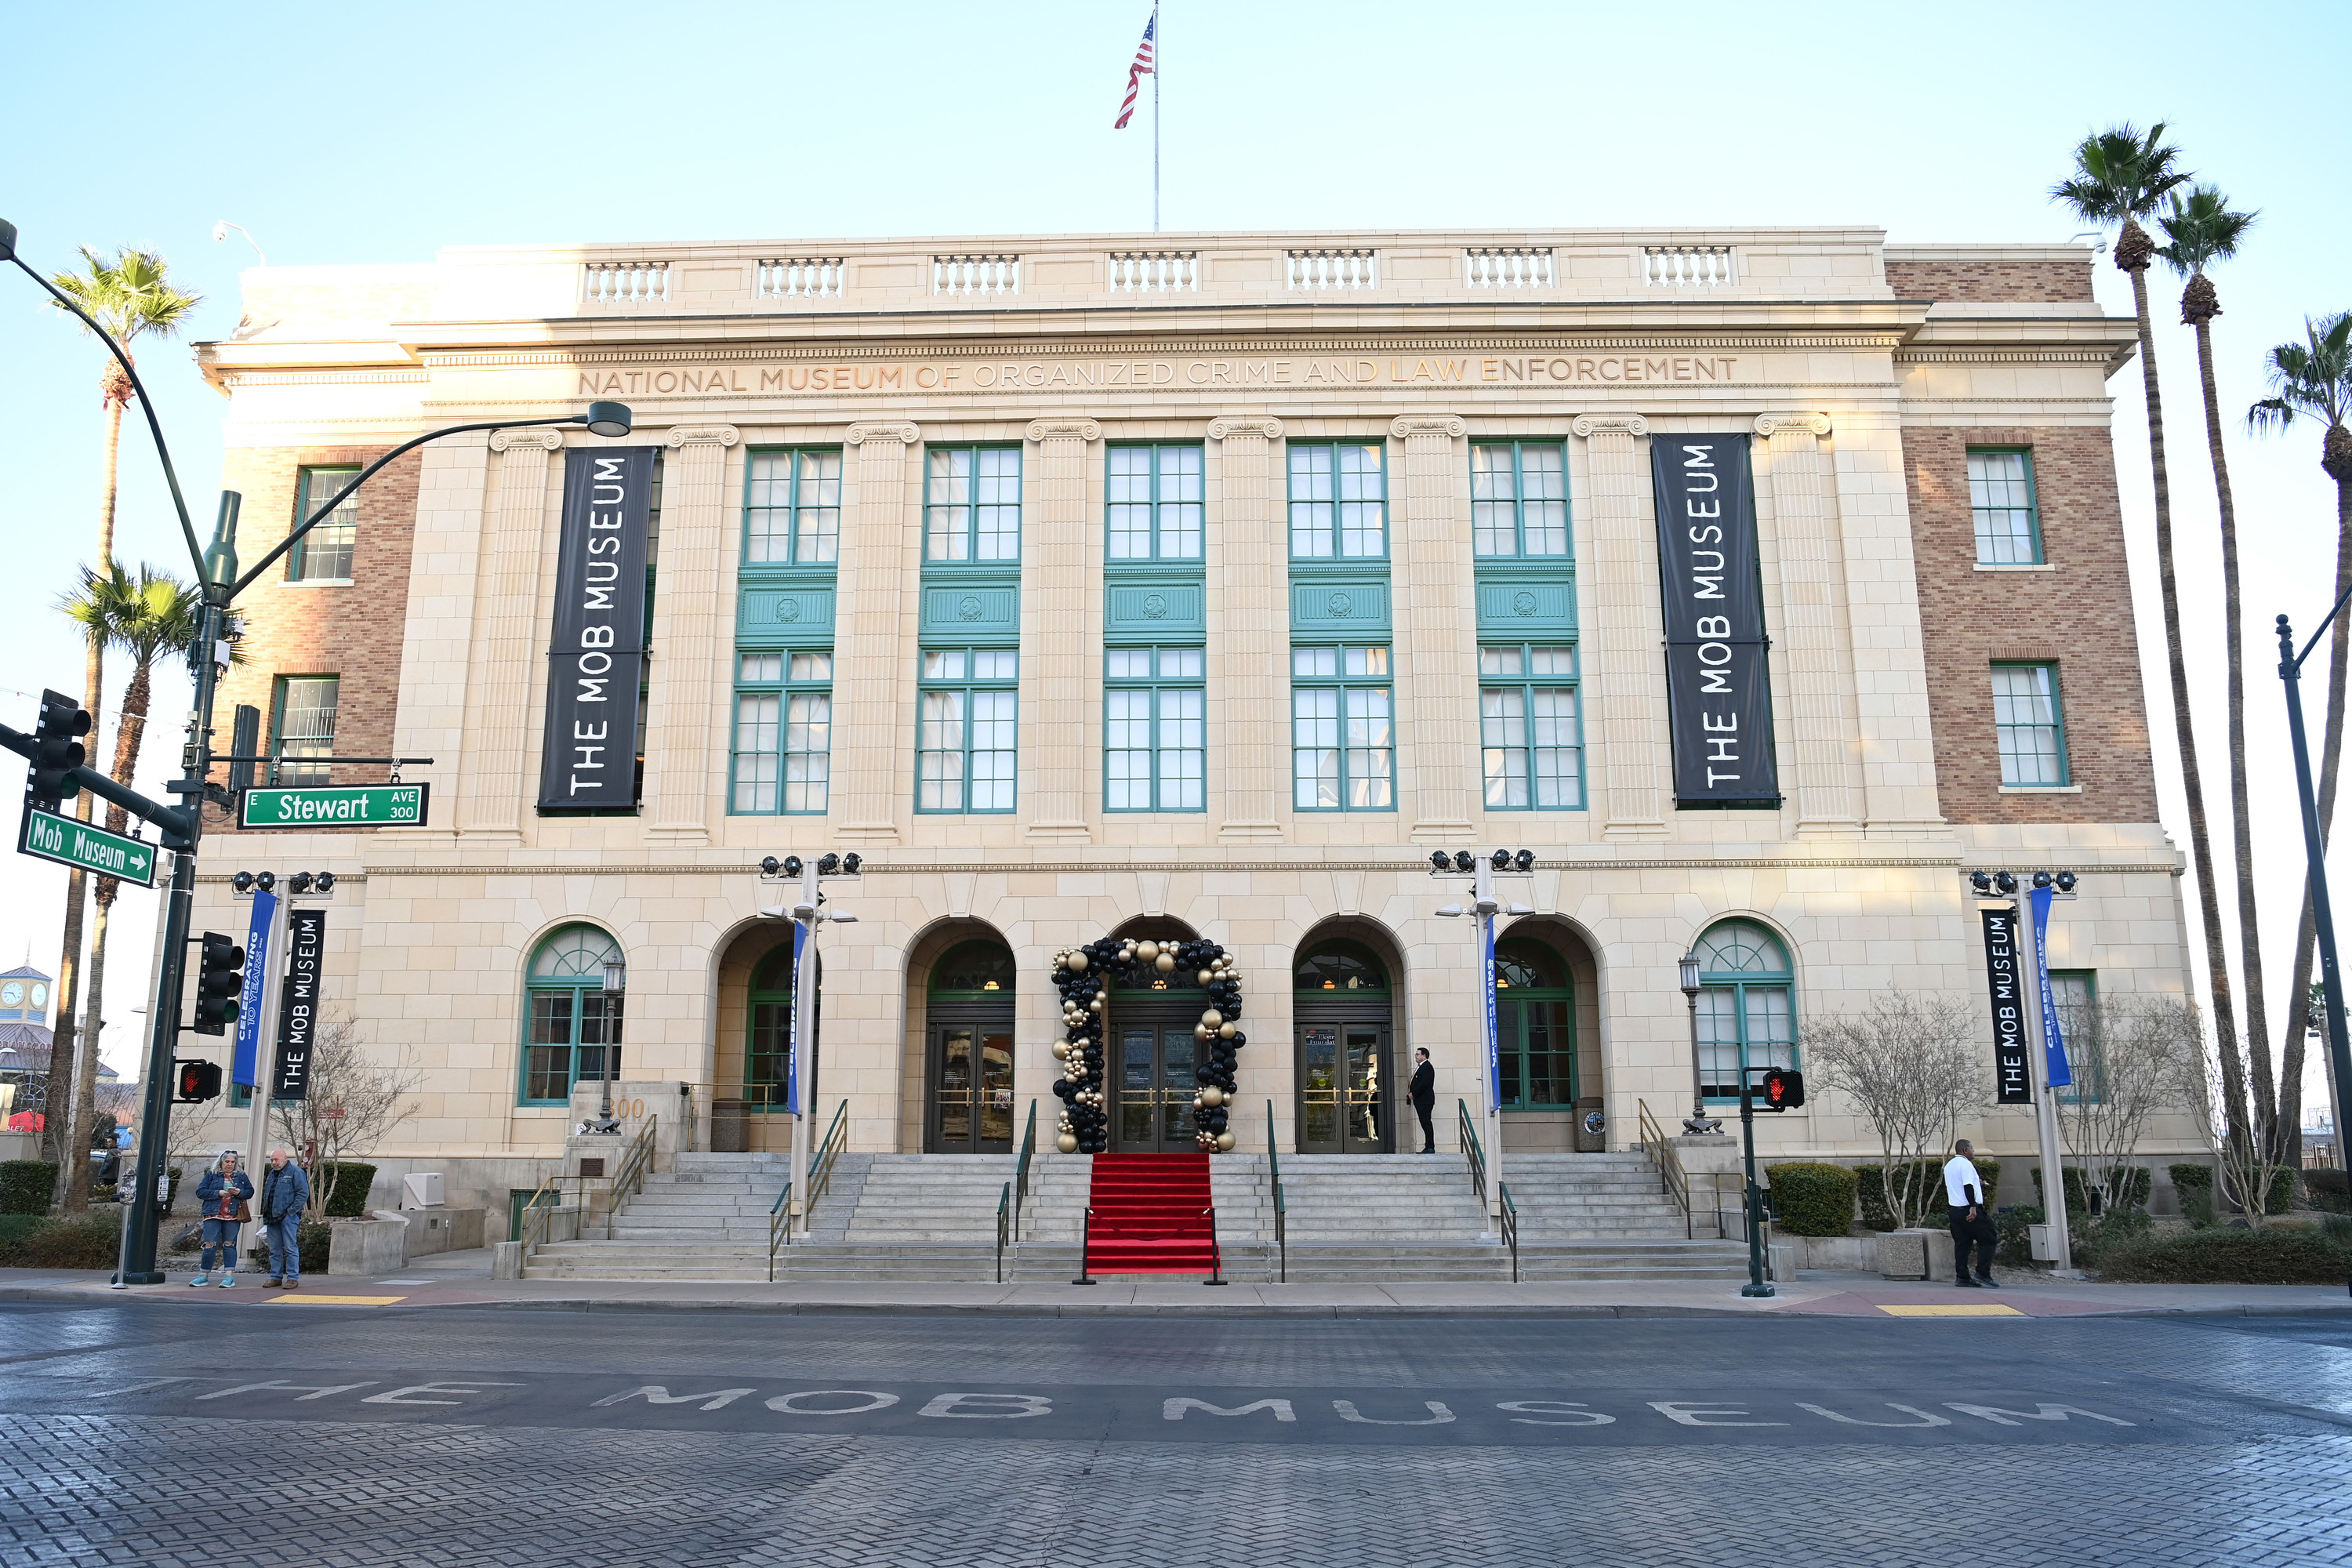 The Mob Museum in Las Vegas, a light-colored historical building surrounded by palm trees, on a sunny day